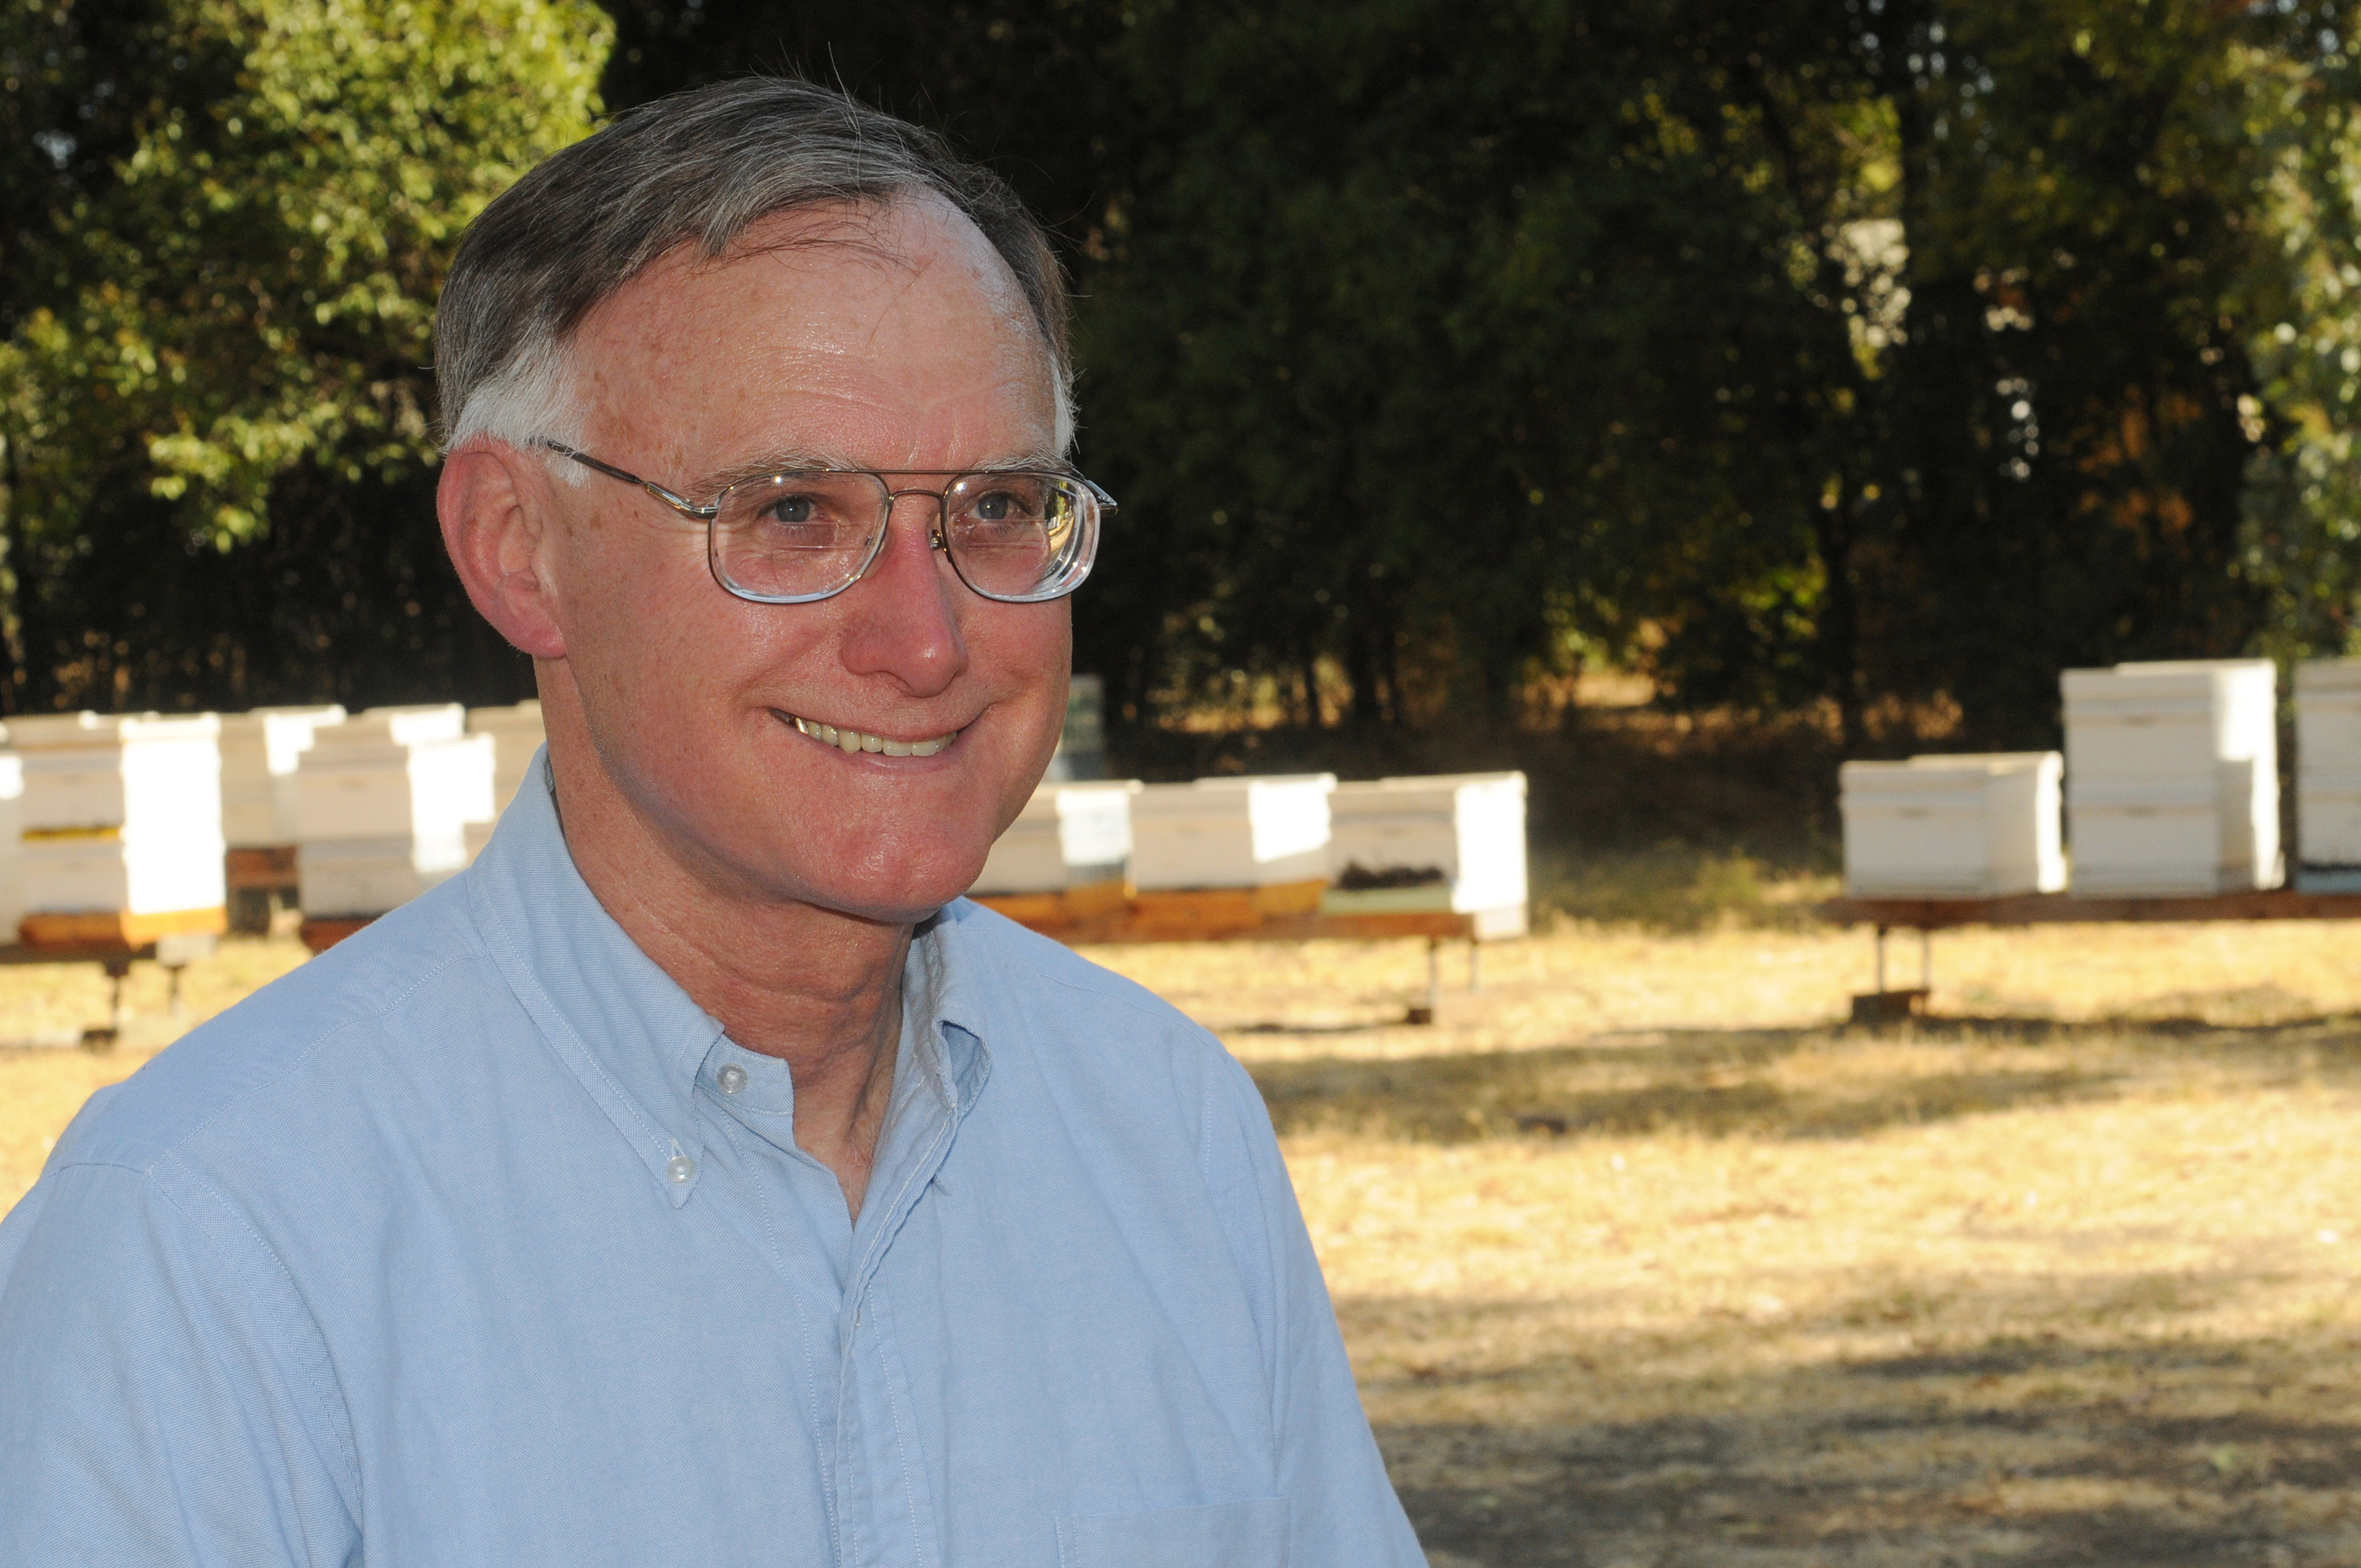 UC Cooperative Extension apiculturist Eric Mussen (1944-2022), stands in front of the apiary at the Harry H. Laidlaw Jr. Honey Bee Research Facility, UC Davis. (Photo by Kathy Keatley Garvey)